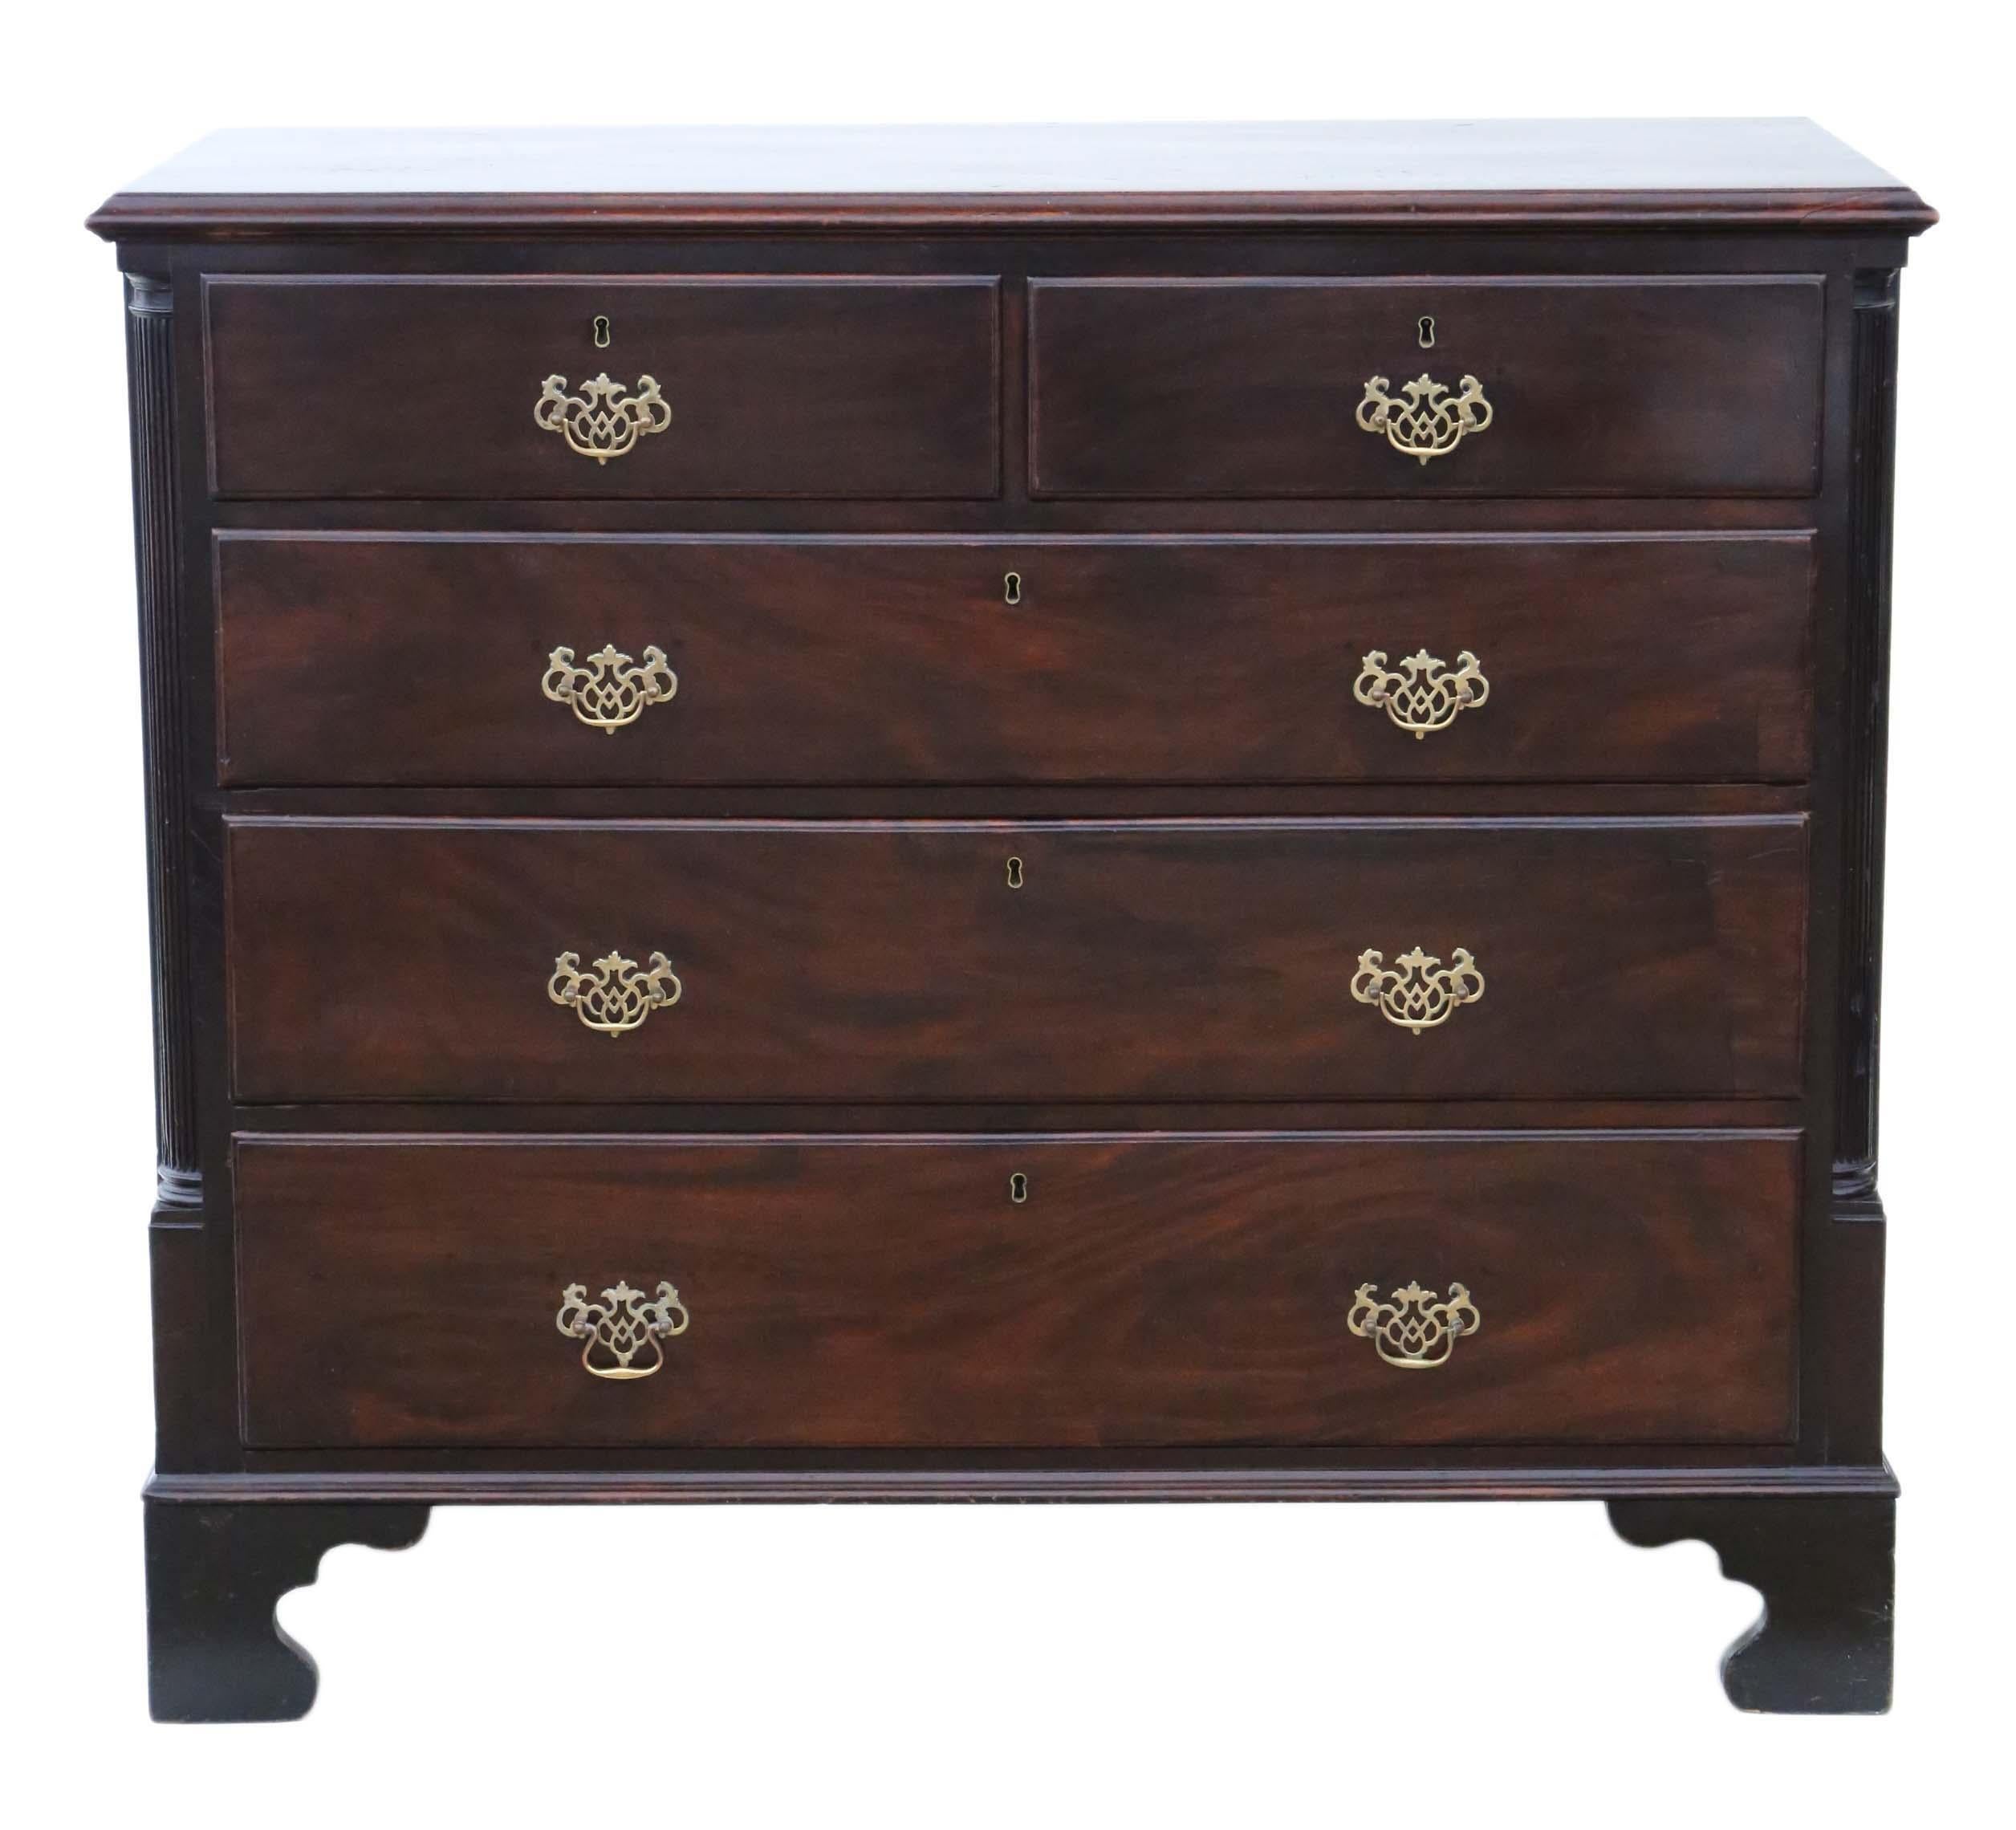 Antique large quality Georgian mahogany chest of drawers, circa 1760.
This is a lovely chest, that is full of age and character.
A quality piece with elegant lines.
Solid, no loose joints.
The oak lined drawers slide freely. We have no keys and